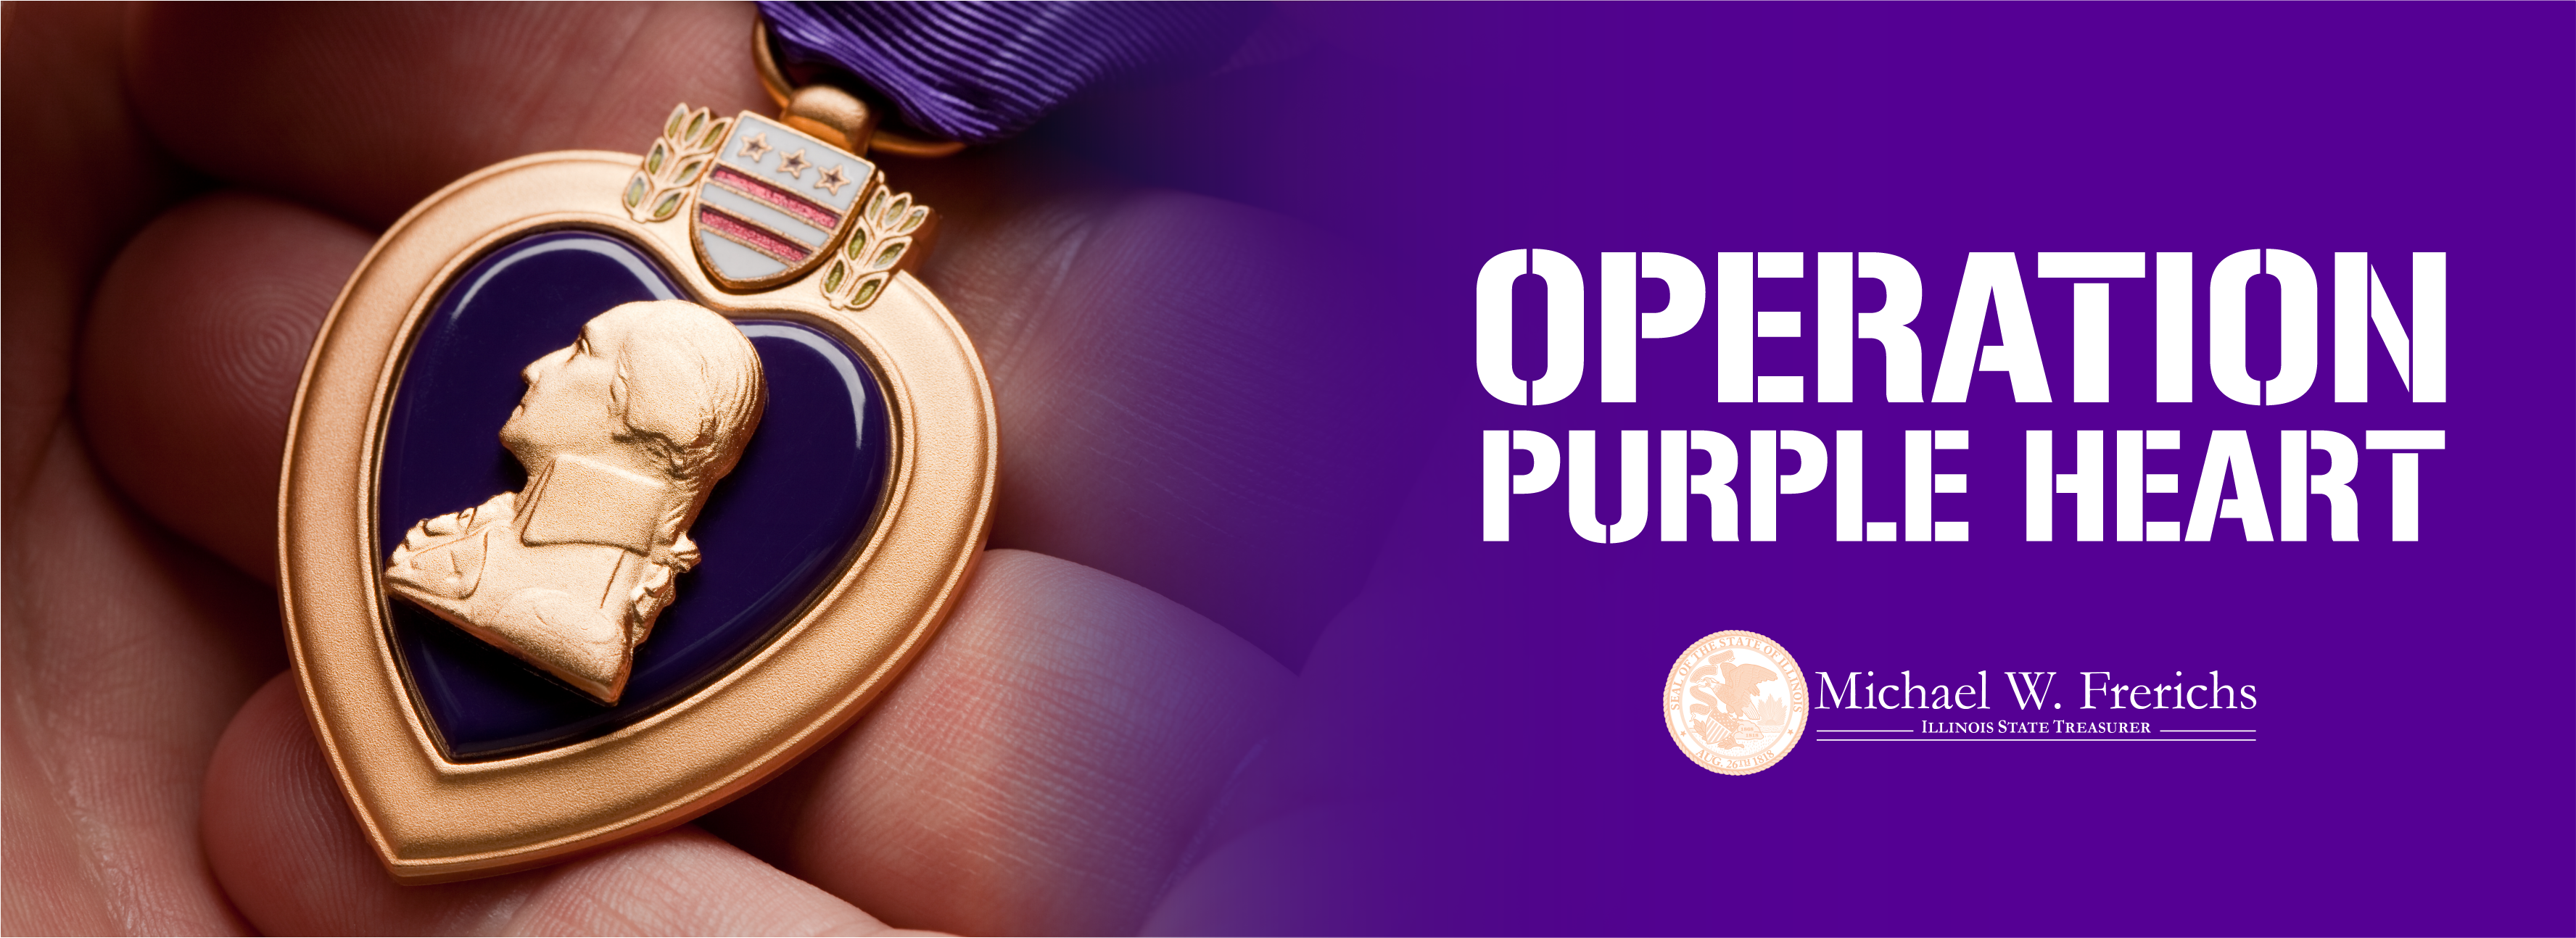 Banner Image of a Purple Heart Medal